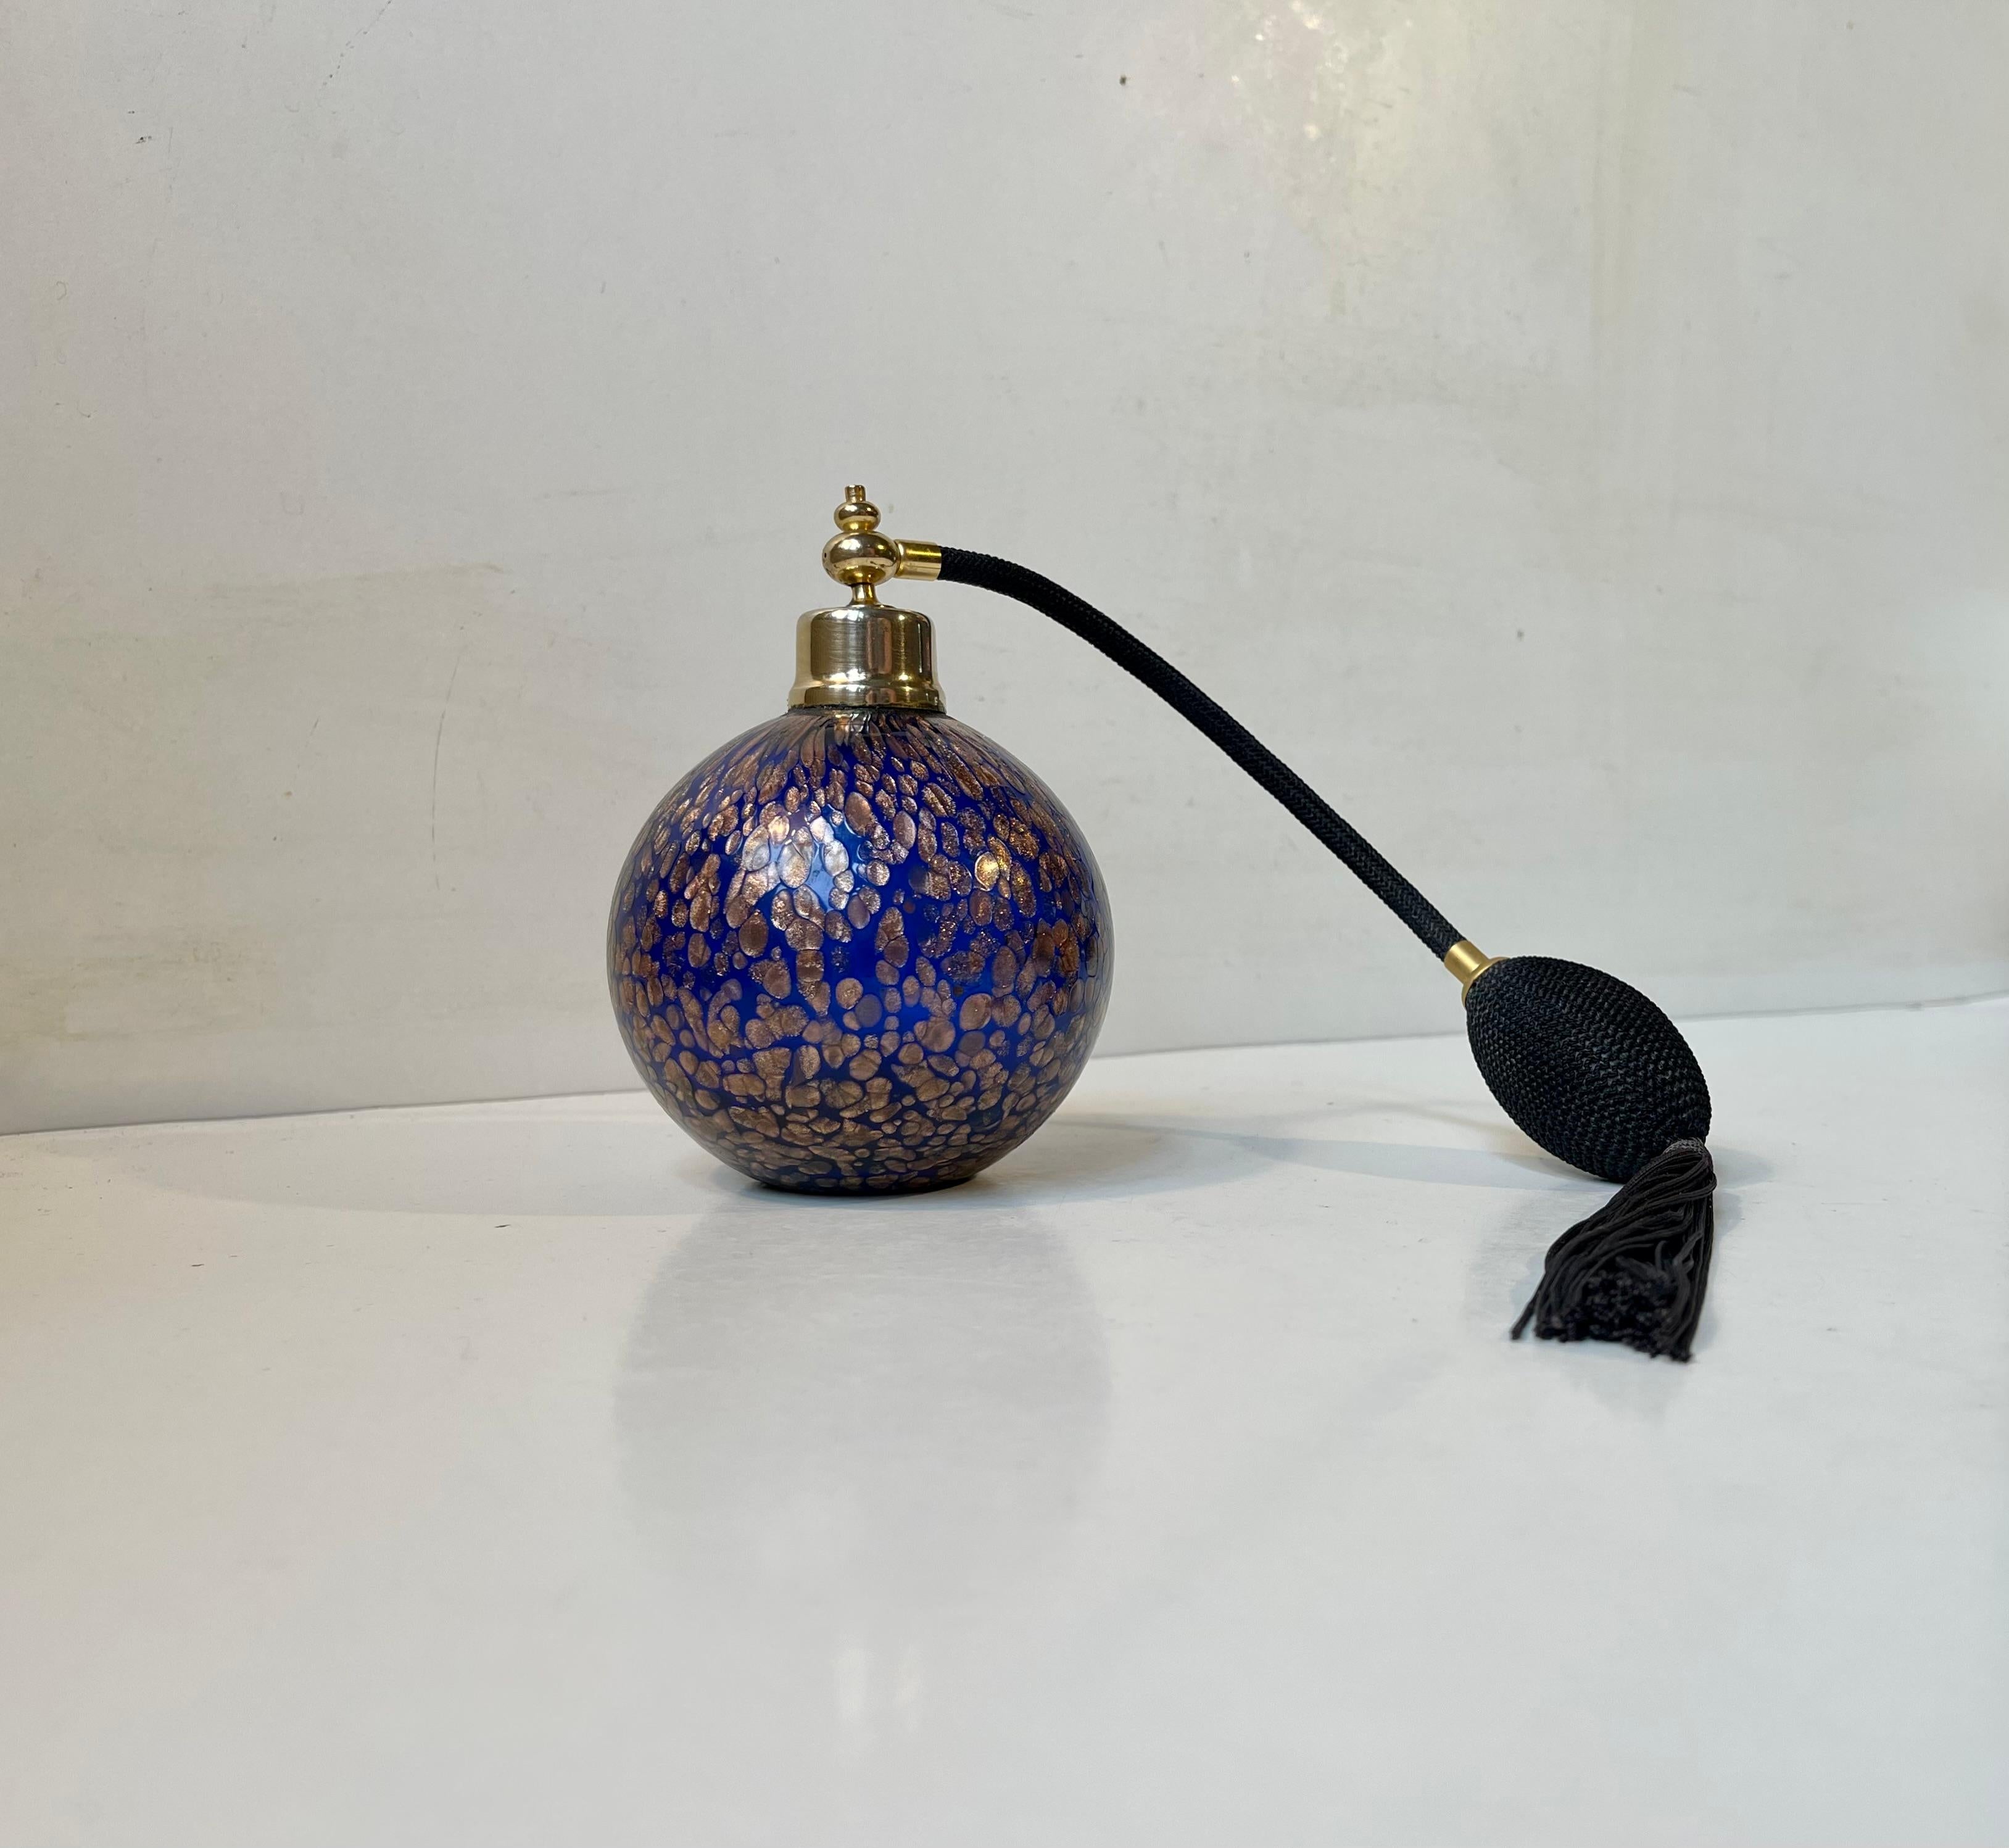 A spherical perfume flacon in cobalt blue murano glass decorated with gold flecks. Its in working order and complete. This object does not contain any perfume but is refillable.
Measurements: H: 12,5 cm, Diameter: 10 cm. Sprayer/ornament length: 30